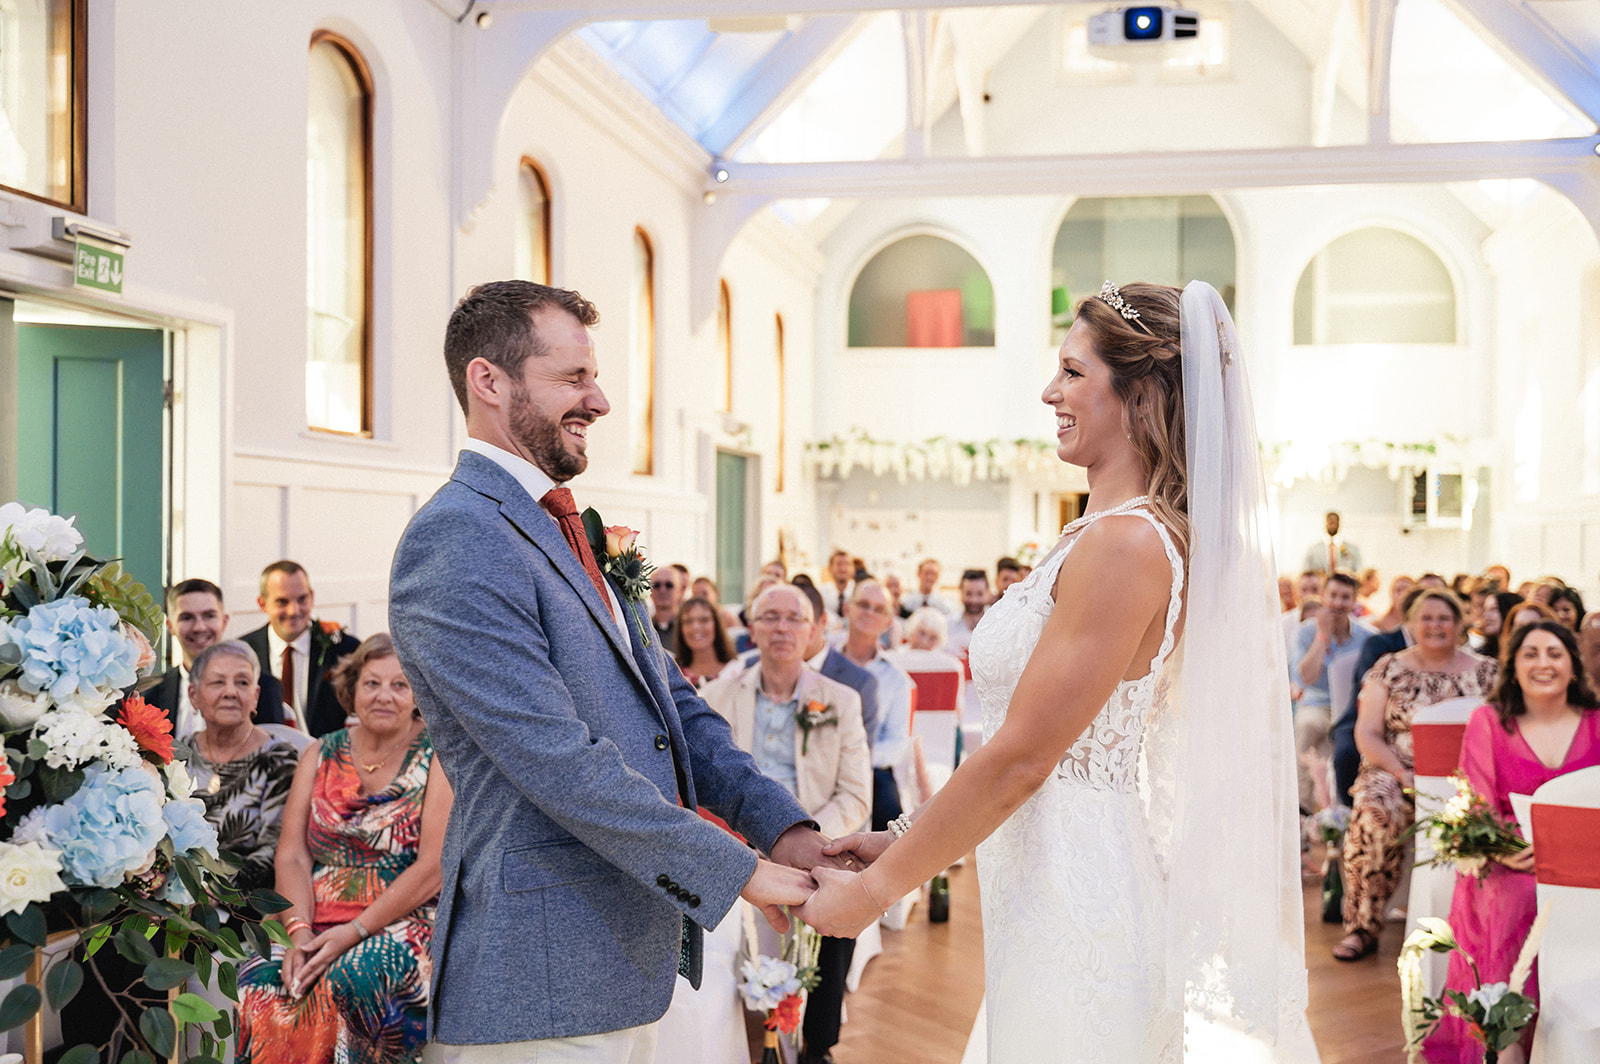 Natalie and George exchanging vows during the wedding ceremony at Ashburton Hall